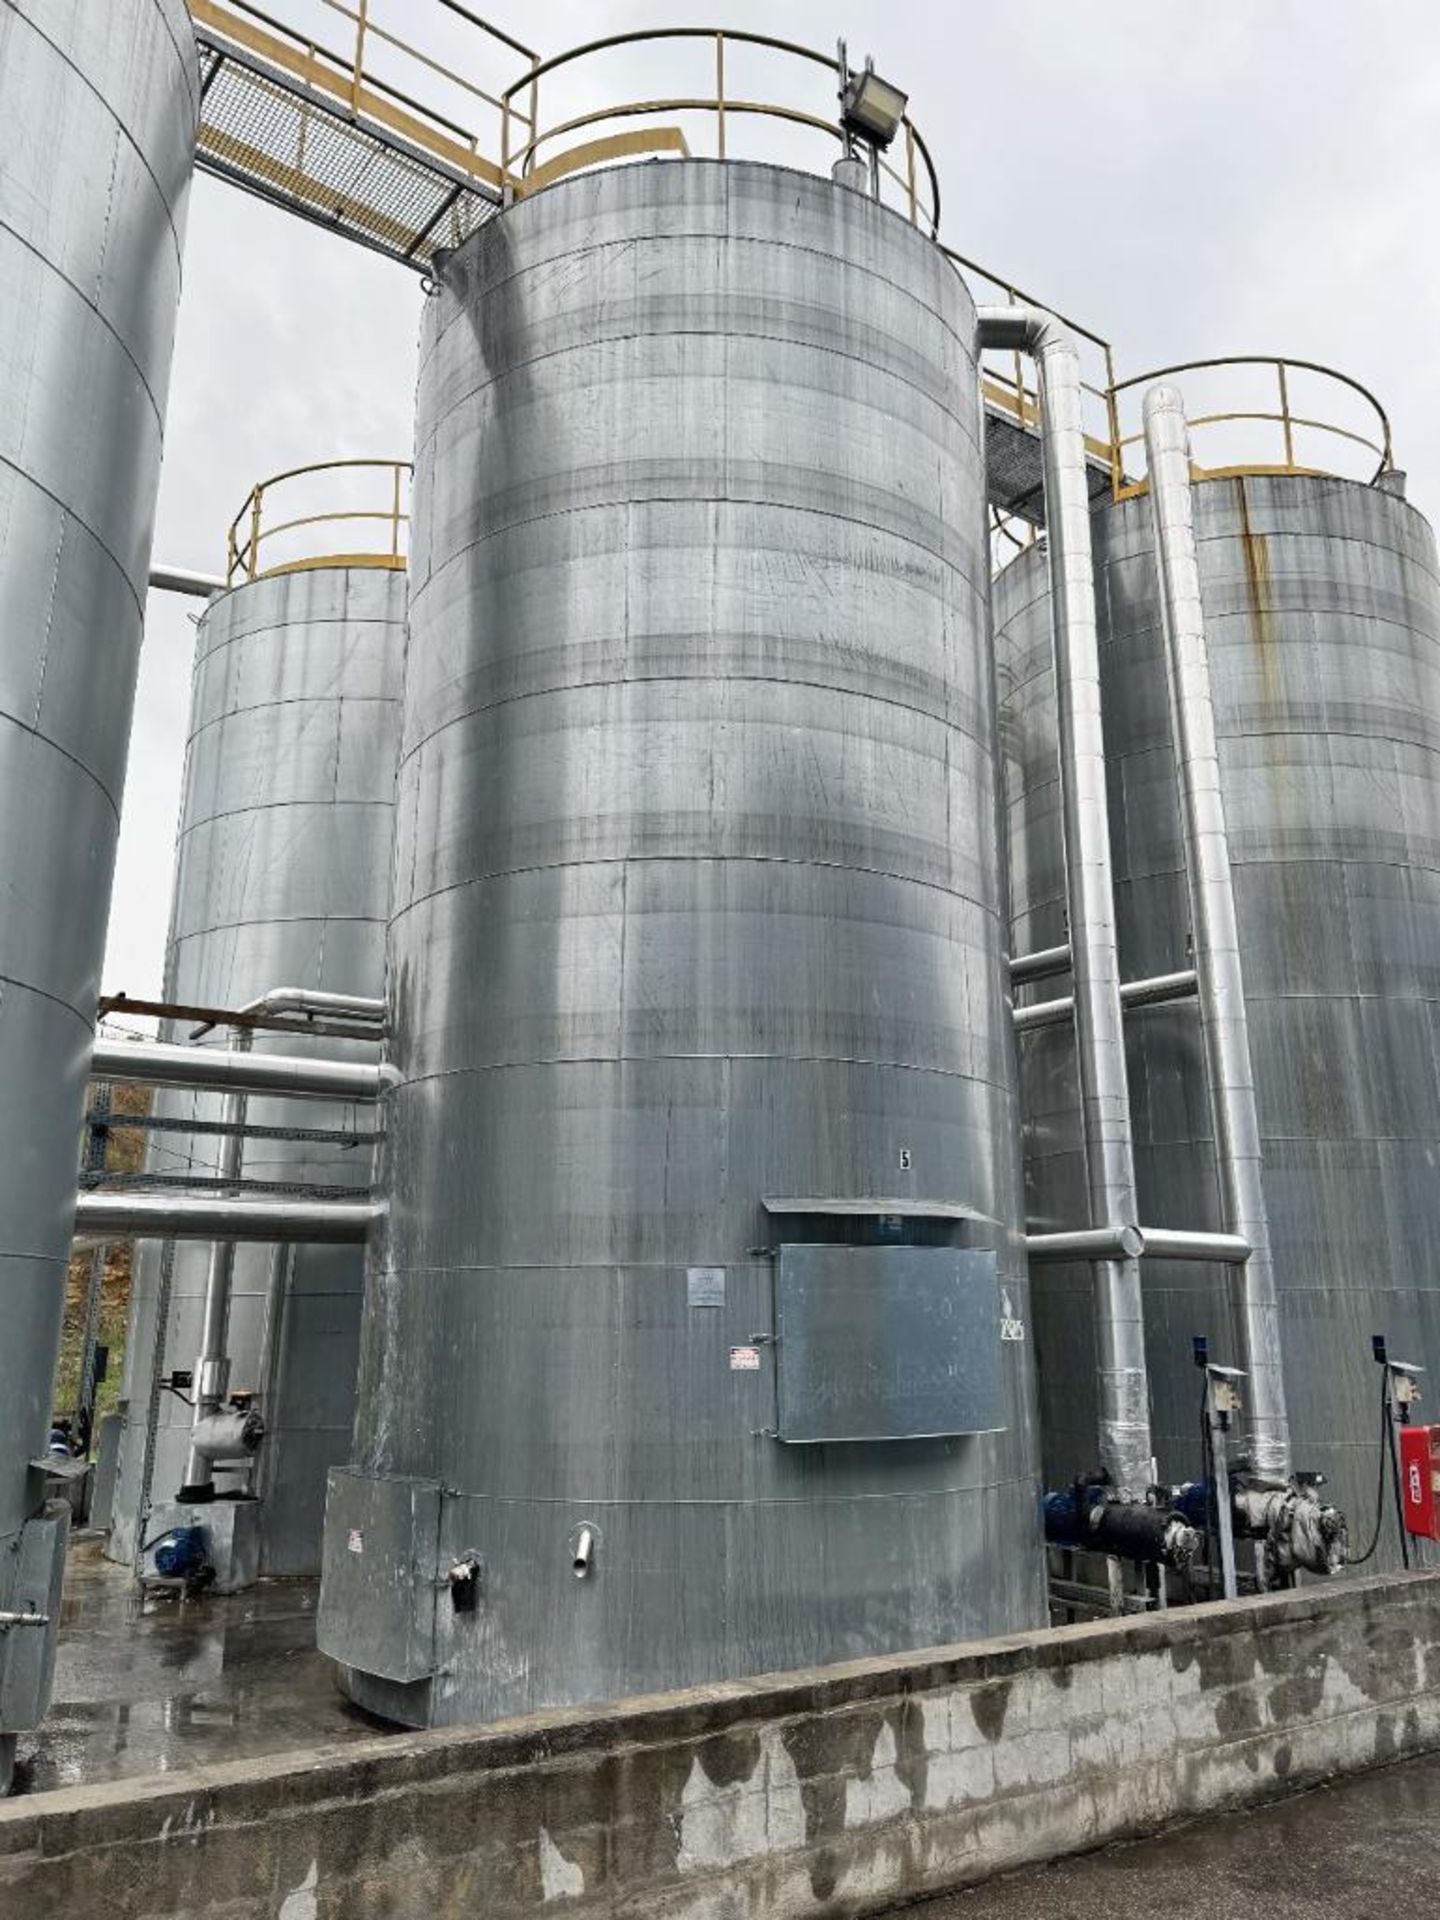 EKO Stal Approximate 60,000 Liter 304 Stainless Steel Tank. Approximate overall 146 x 26' tall. Part